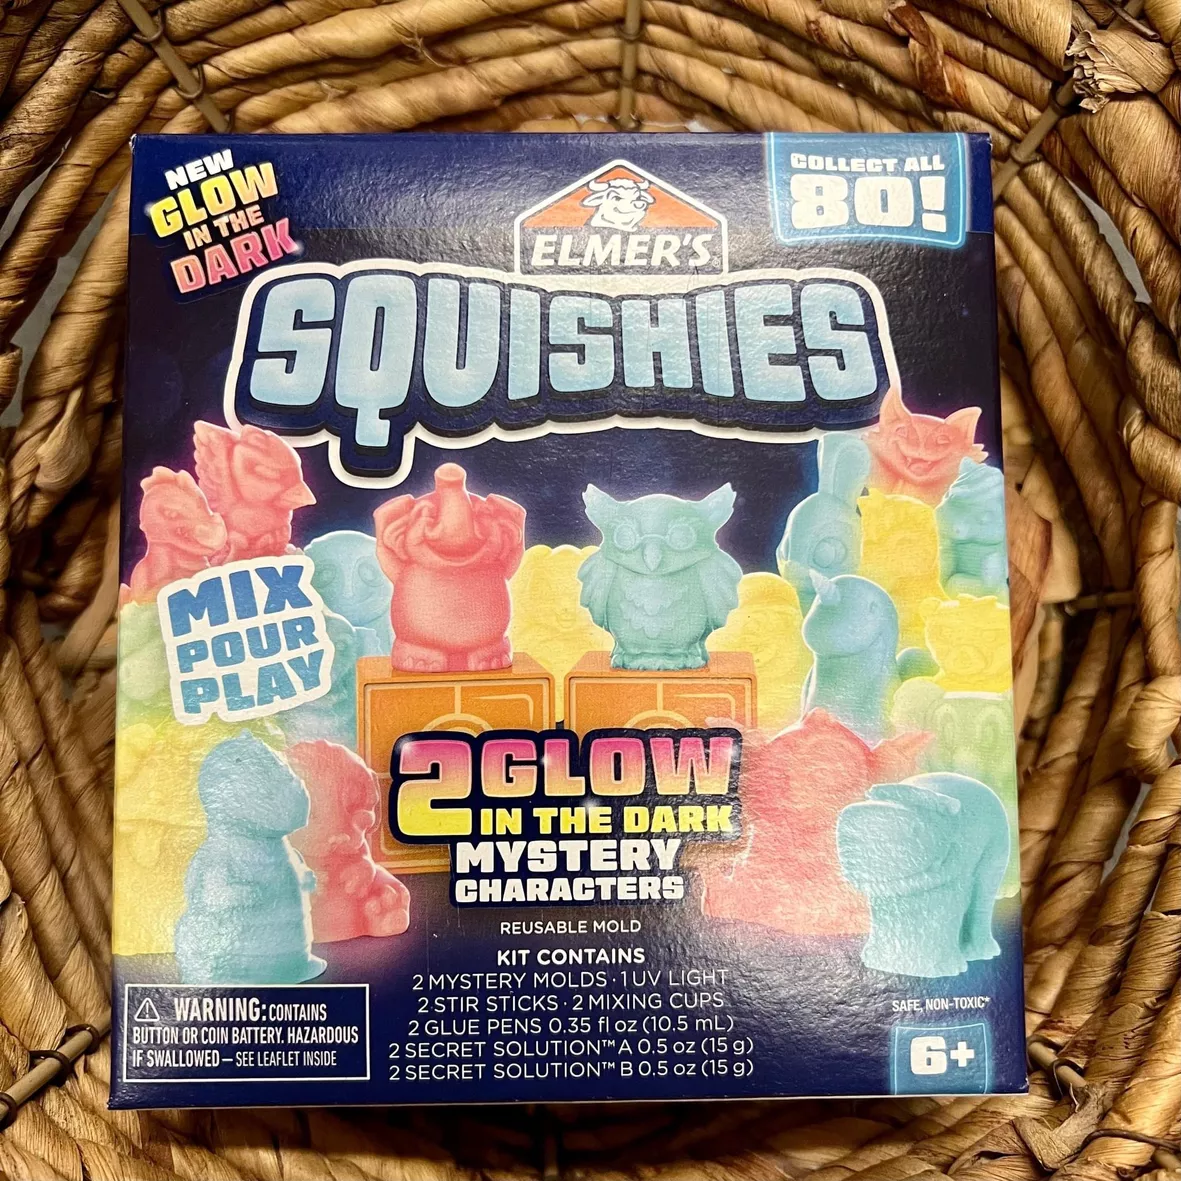 Elmer’s Squishies DIY Squishy Toy Kit, 4 Count Mystery Characters